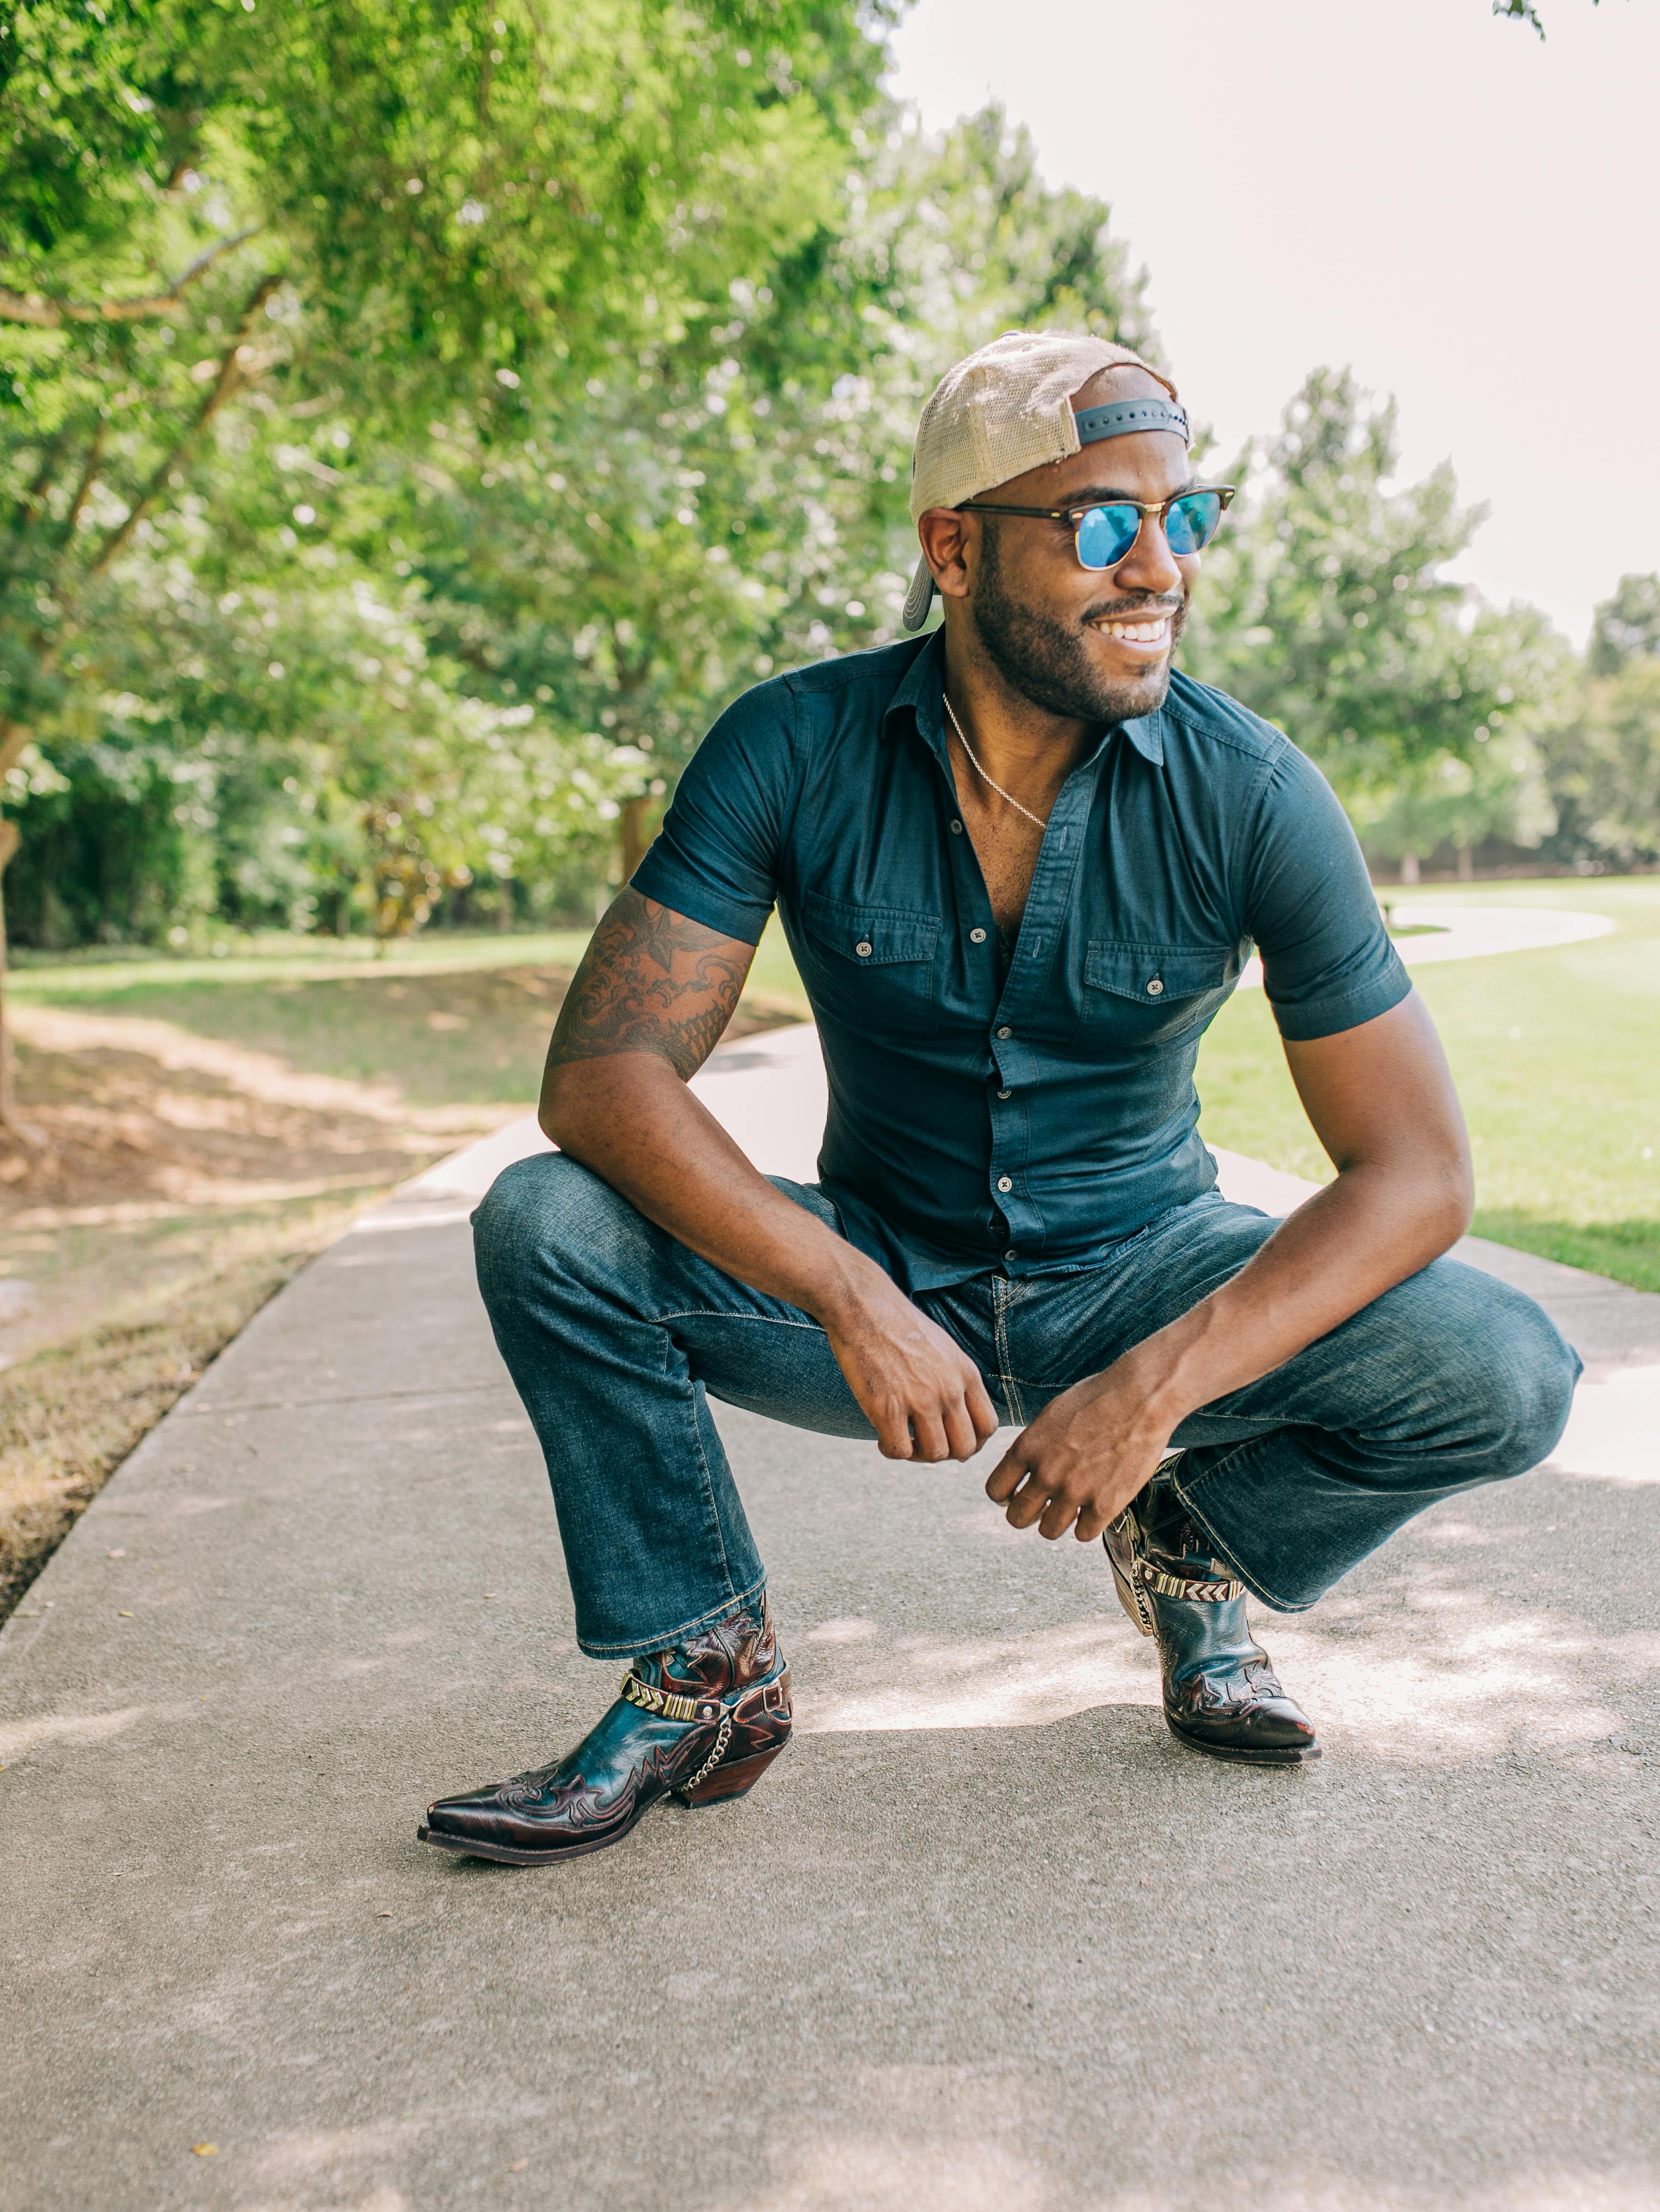 Man squatting on a sidewalk in a park, wearing sunglasses, a baseball cap, and cowboy boots.